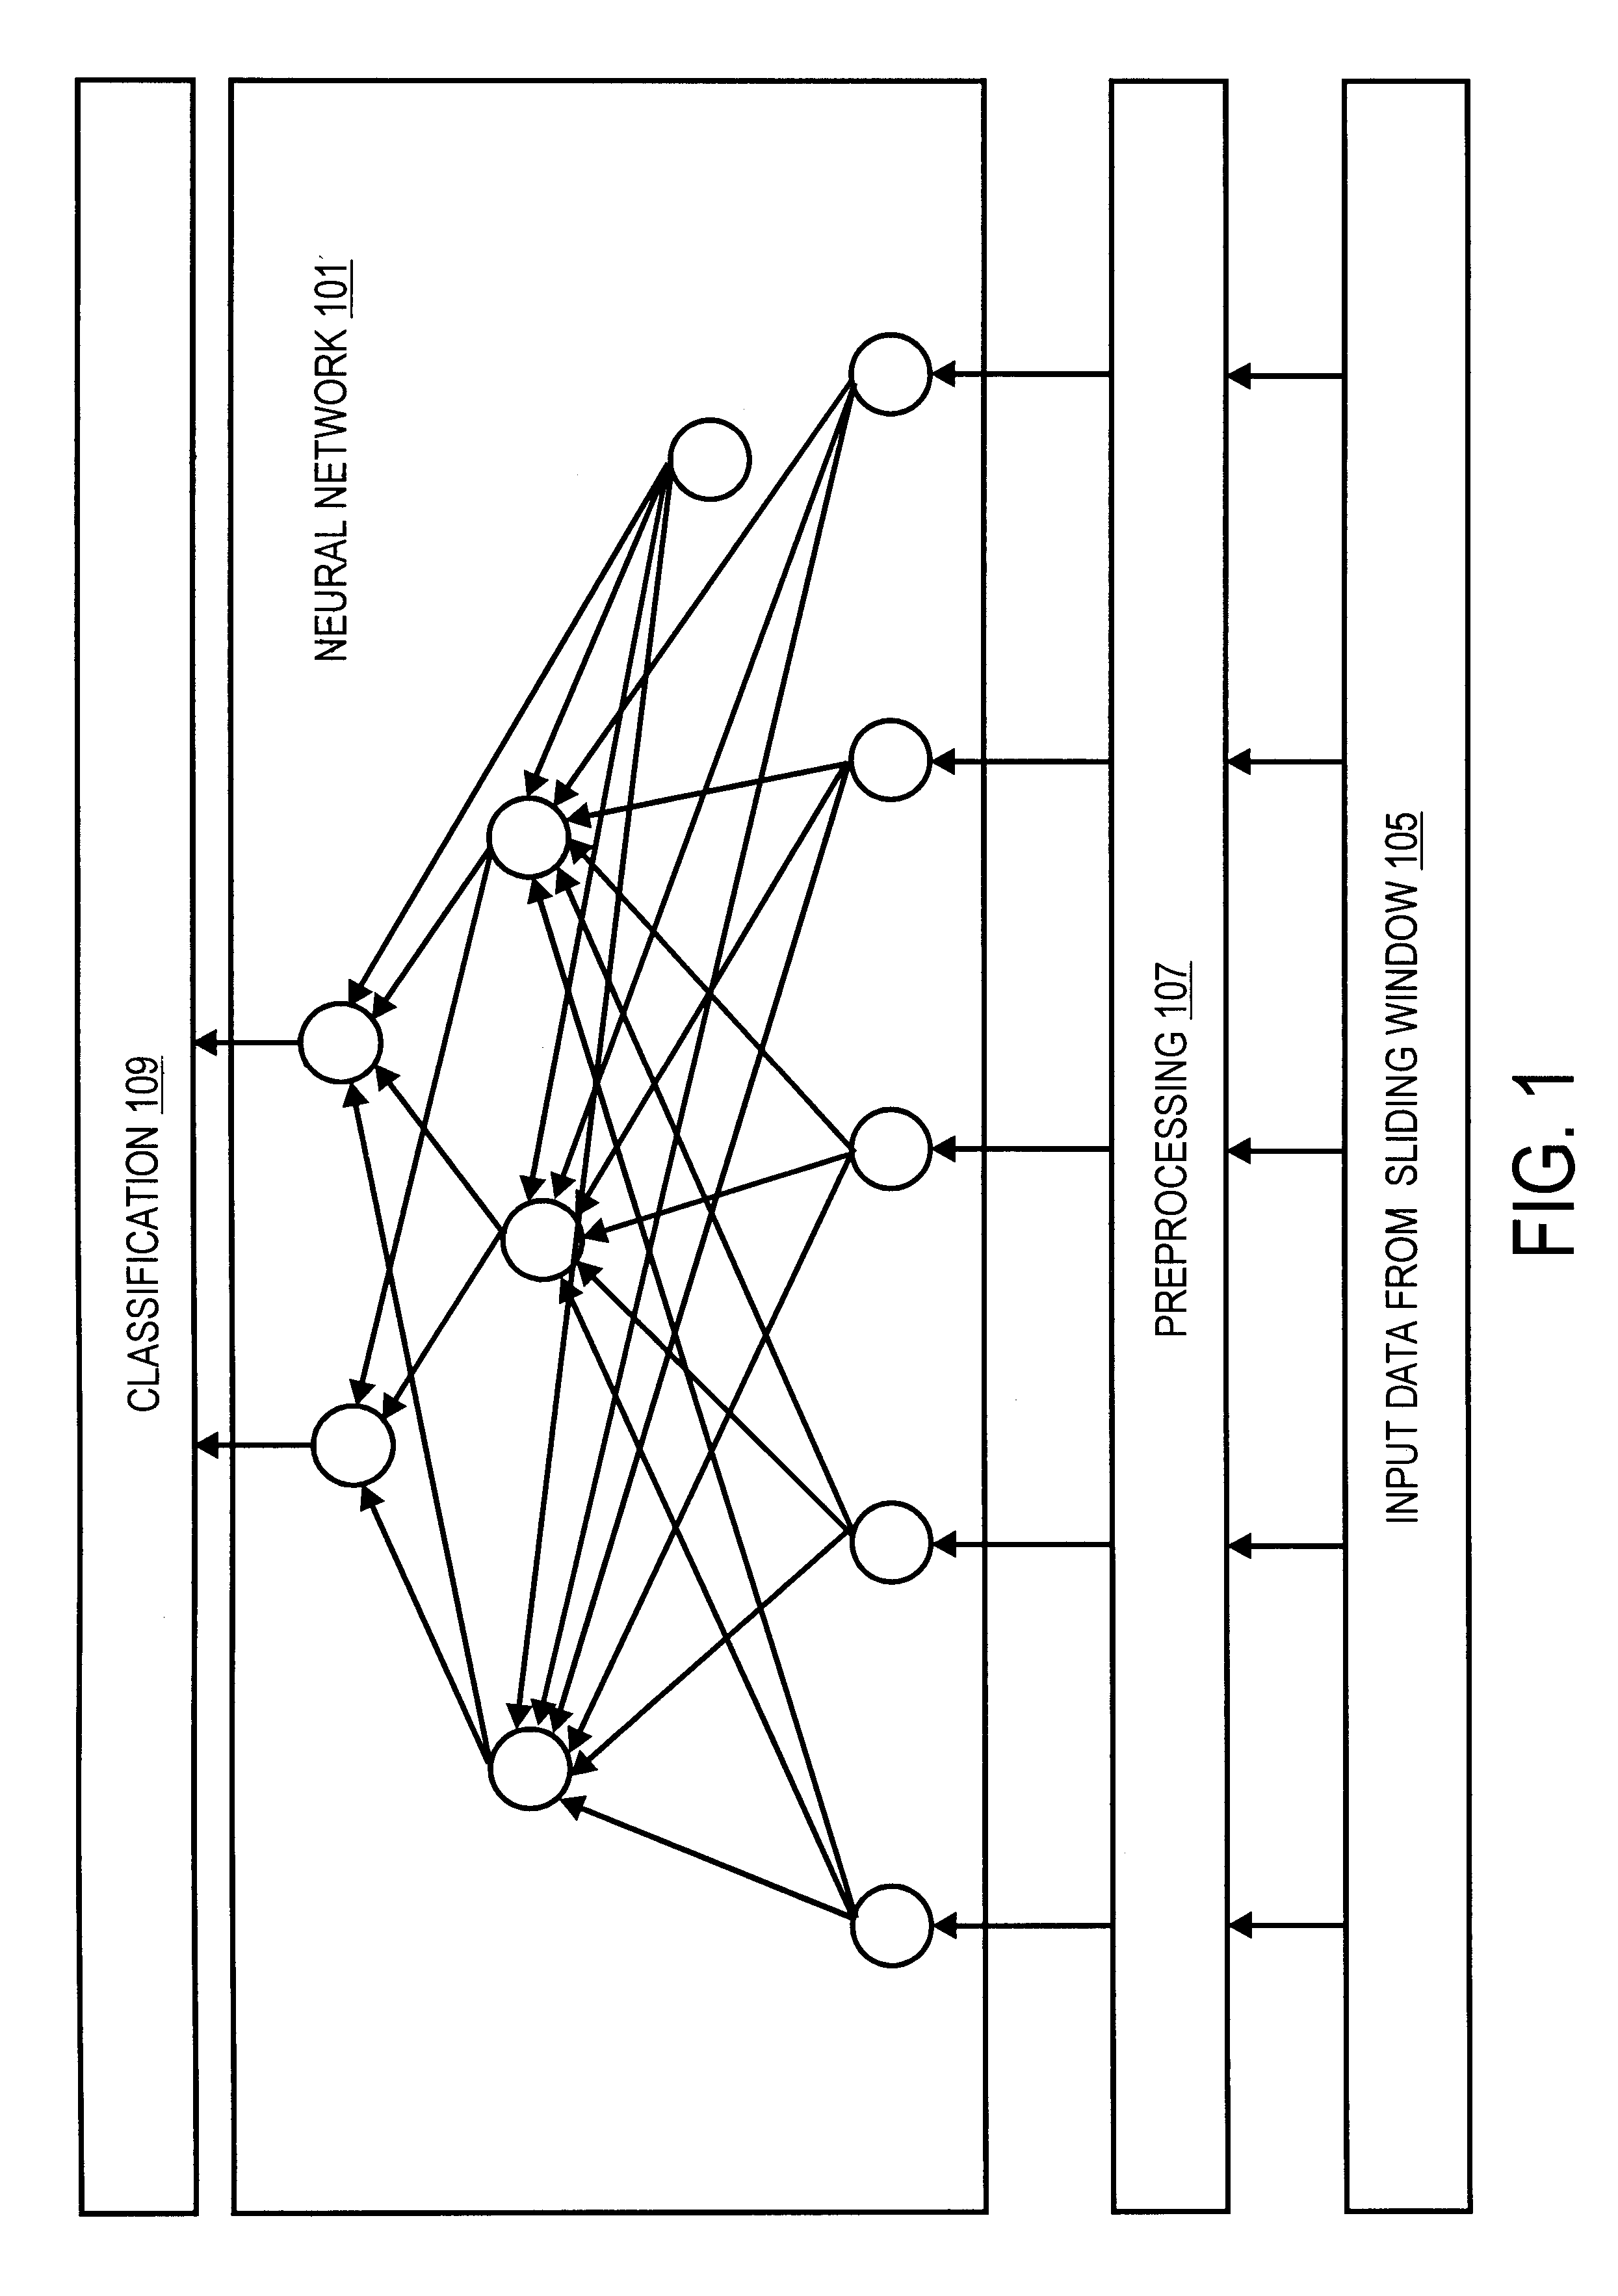 System and method for enhanced hydrocarbon recovery